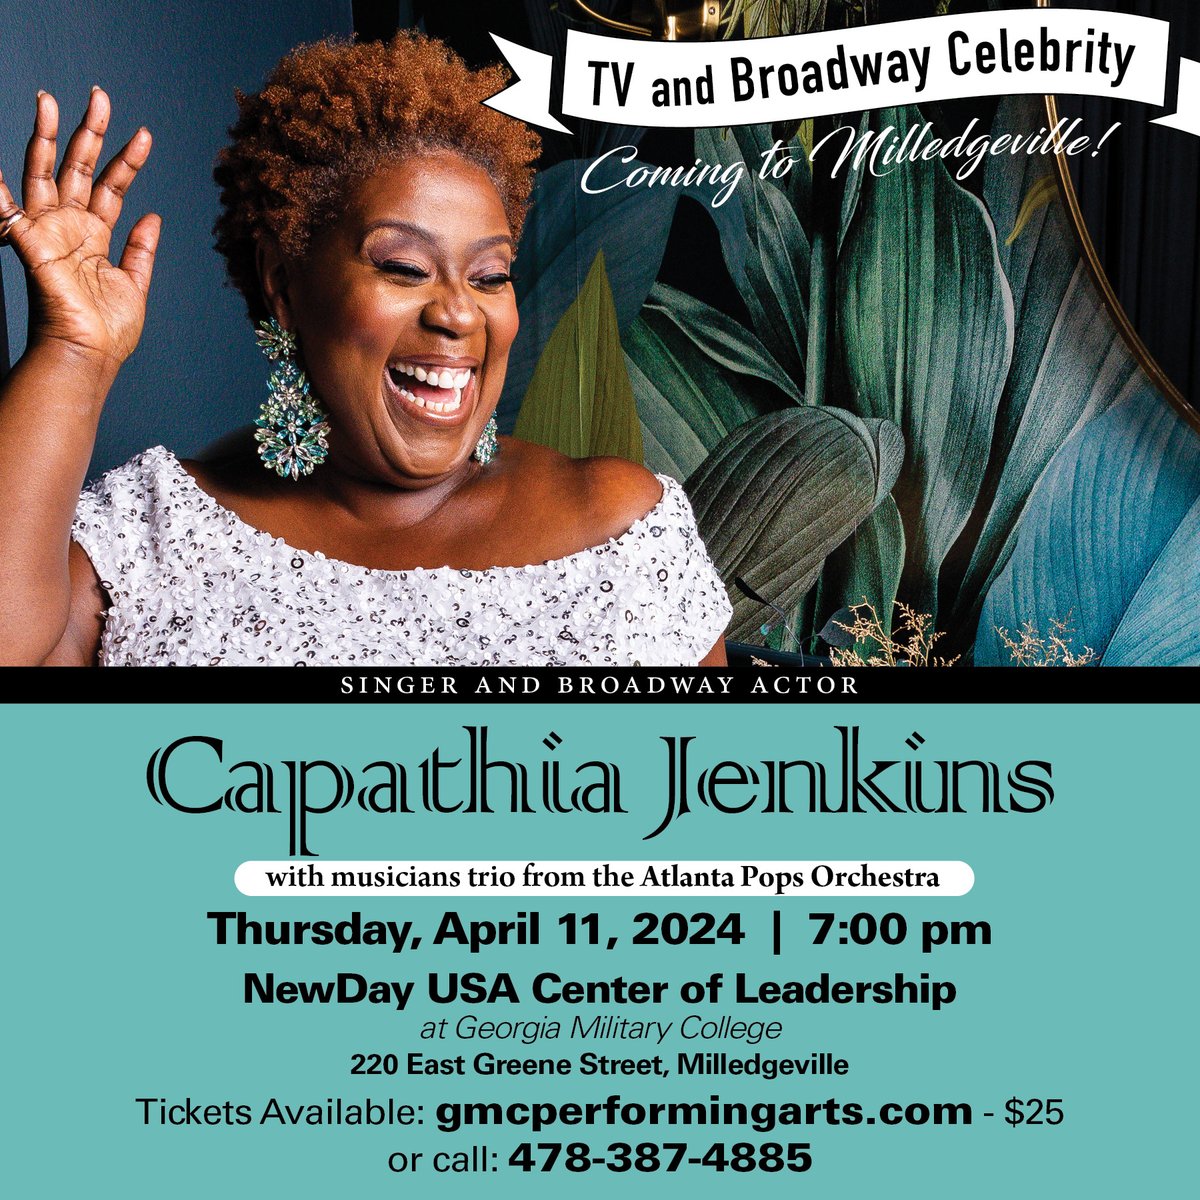 Who will be joining us to see Capathia Jenkins perform on April 11th?! We are excited to see her shine on our NewDay USA Center of Leadership's stage. Book your tickets today! 🎤 gmctickets.booktix.com/index.php